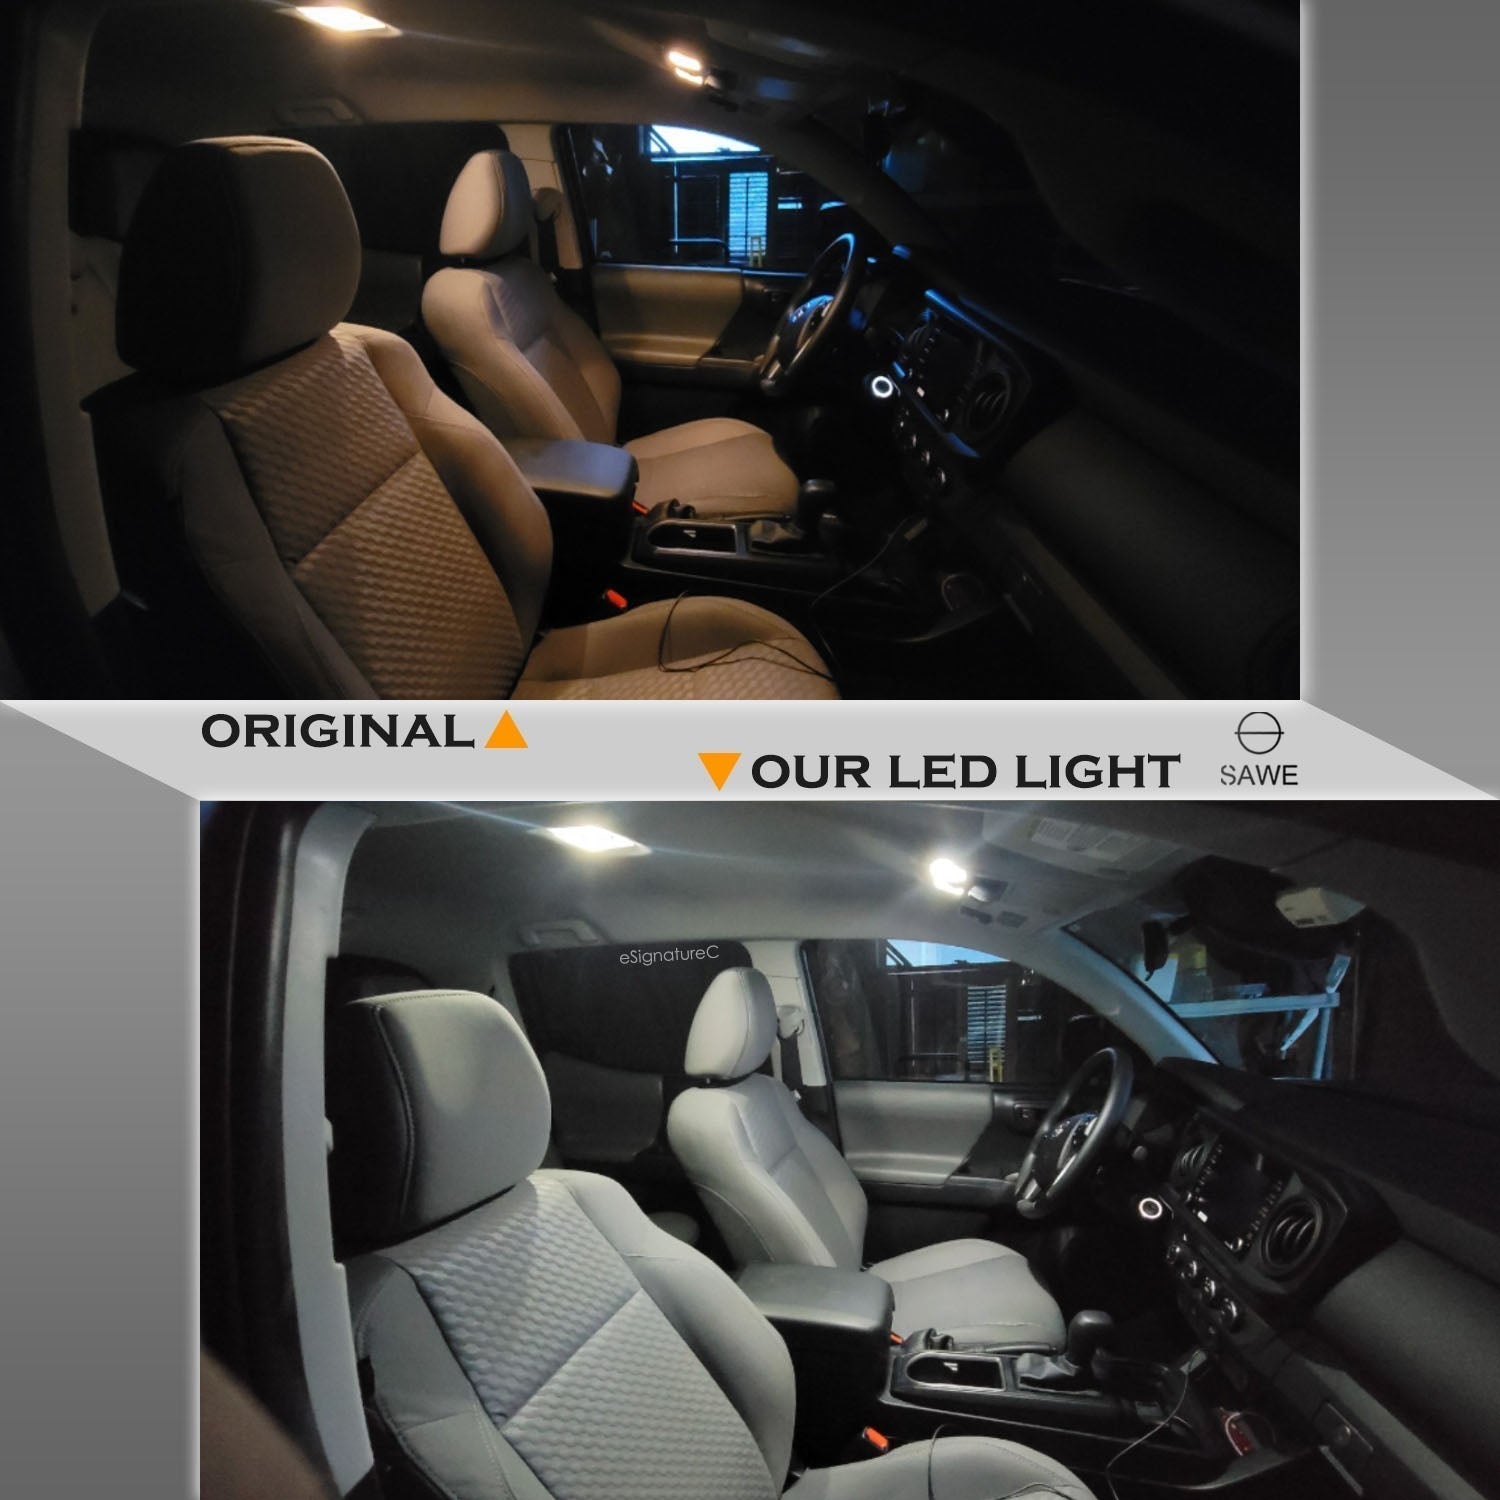 For Ford Fusion Interior LED Lights - Dome & Map Light Bulbs Package Kit for 2006 - 2012 - White